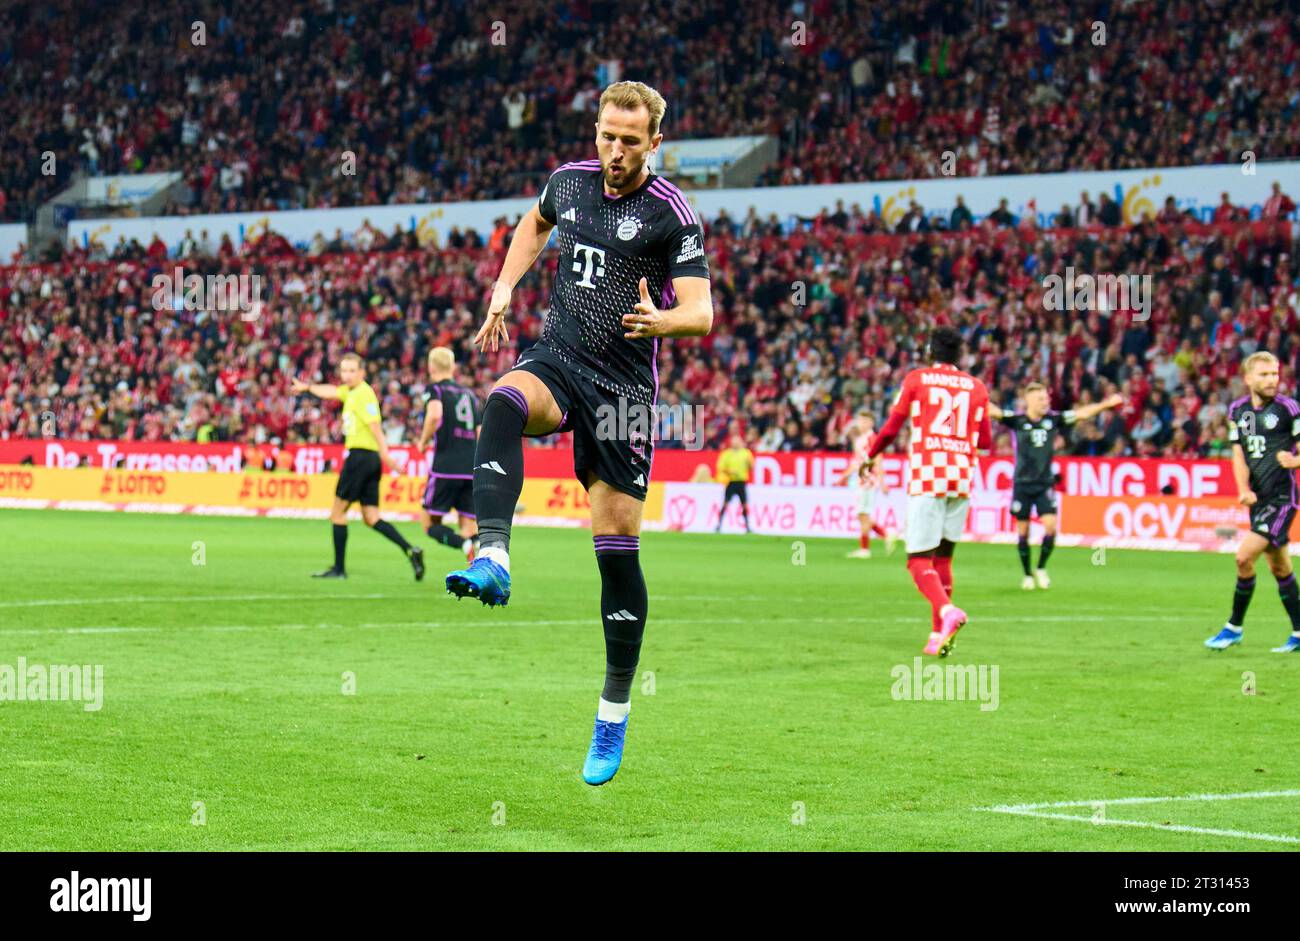 Harry Kane, FCB 9 celebrates his 0-2 goal, happy, laugh, celebration,   in the match 1. FSV MAINZ 05 -  FC BAYERN MUENCHEN  1-3  on Oct 21, 2023 in Mainz, Germany. Season 2023/2024, 1.Bundesliga, FCB, München, matchday 8, 8.Spieltag © Peter Schatz / Alamy Live News    - DFL REGULATIONS PROHIBIT ANY USE OF PHOTOGRAPHS as IMAGE SEQUENCES and/or QUASI-VIDEO - Stock Photo